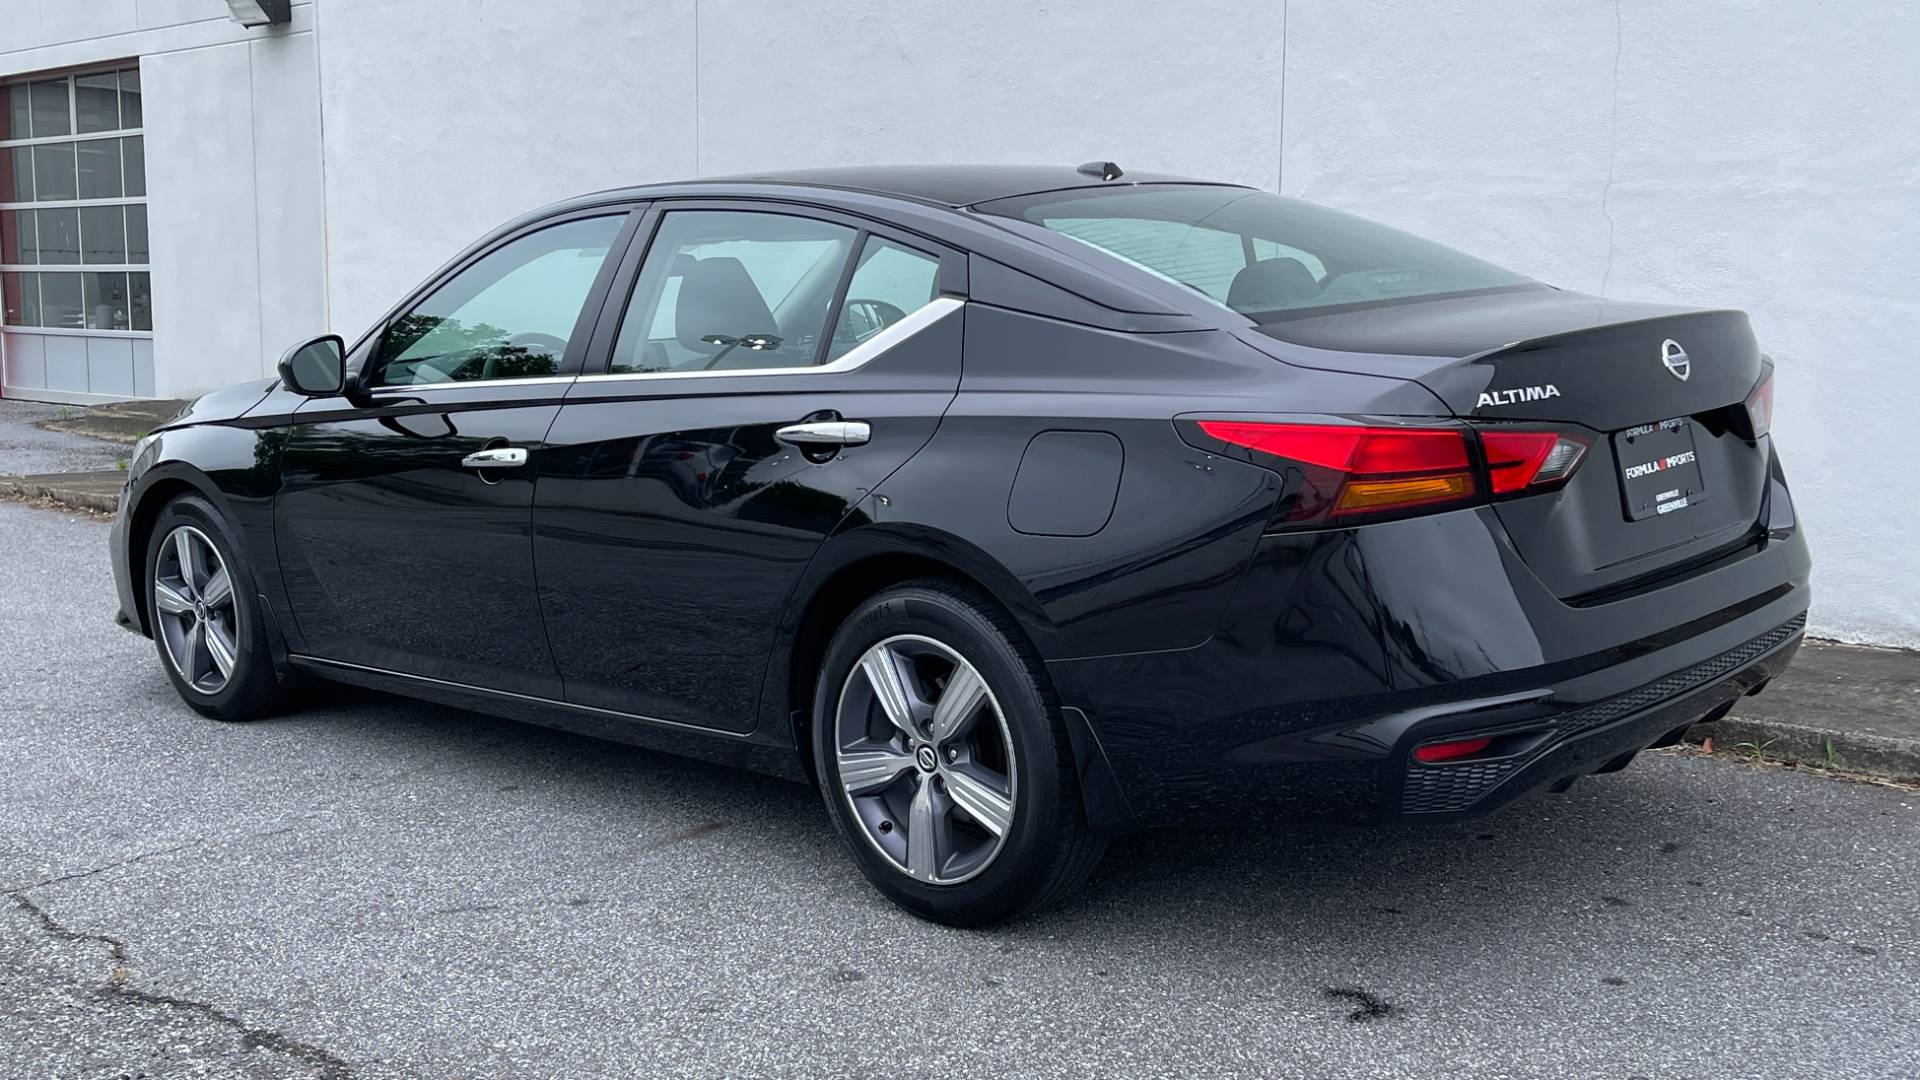 Used 2019 Nissan ALTIMA 2.5 S SEDAN / CVT AUTO / FWD / PROXIMITY KEY / REARVIEW for sale $22,295 at Formula Imports in Charlotte NC 28227 3